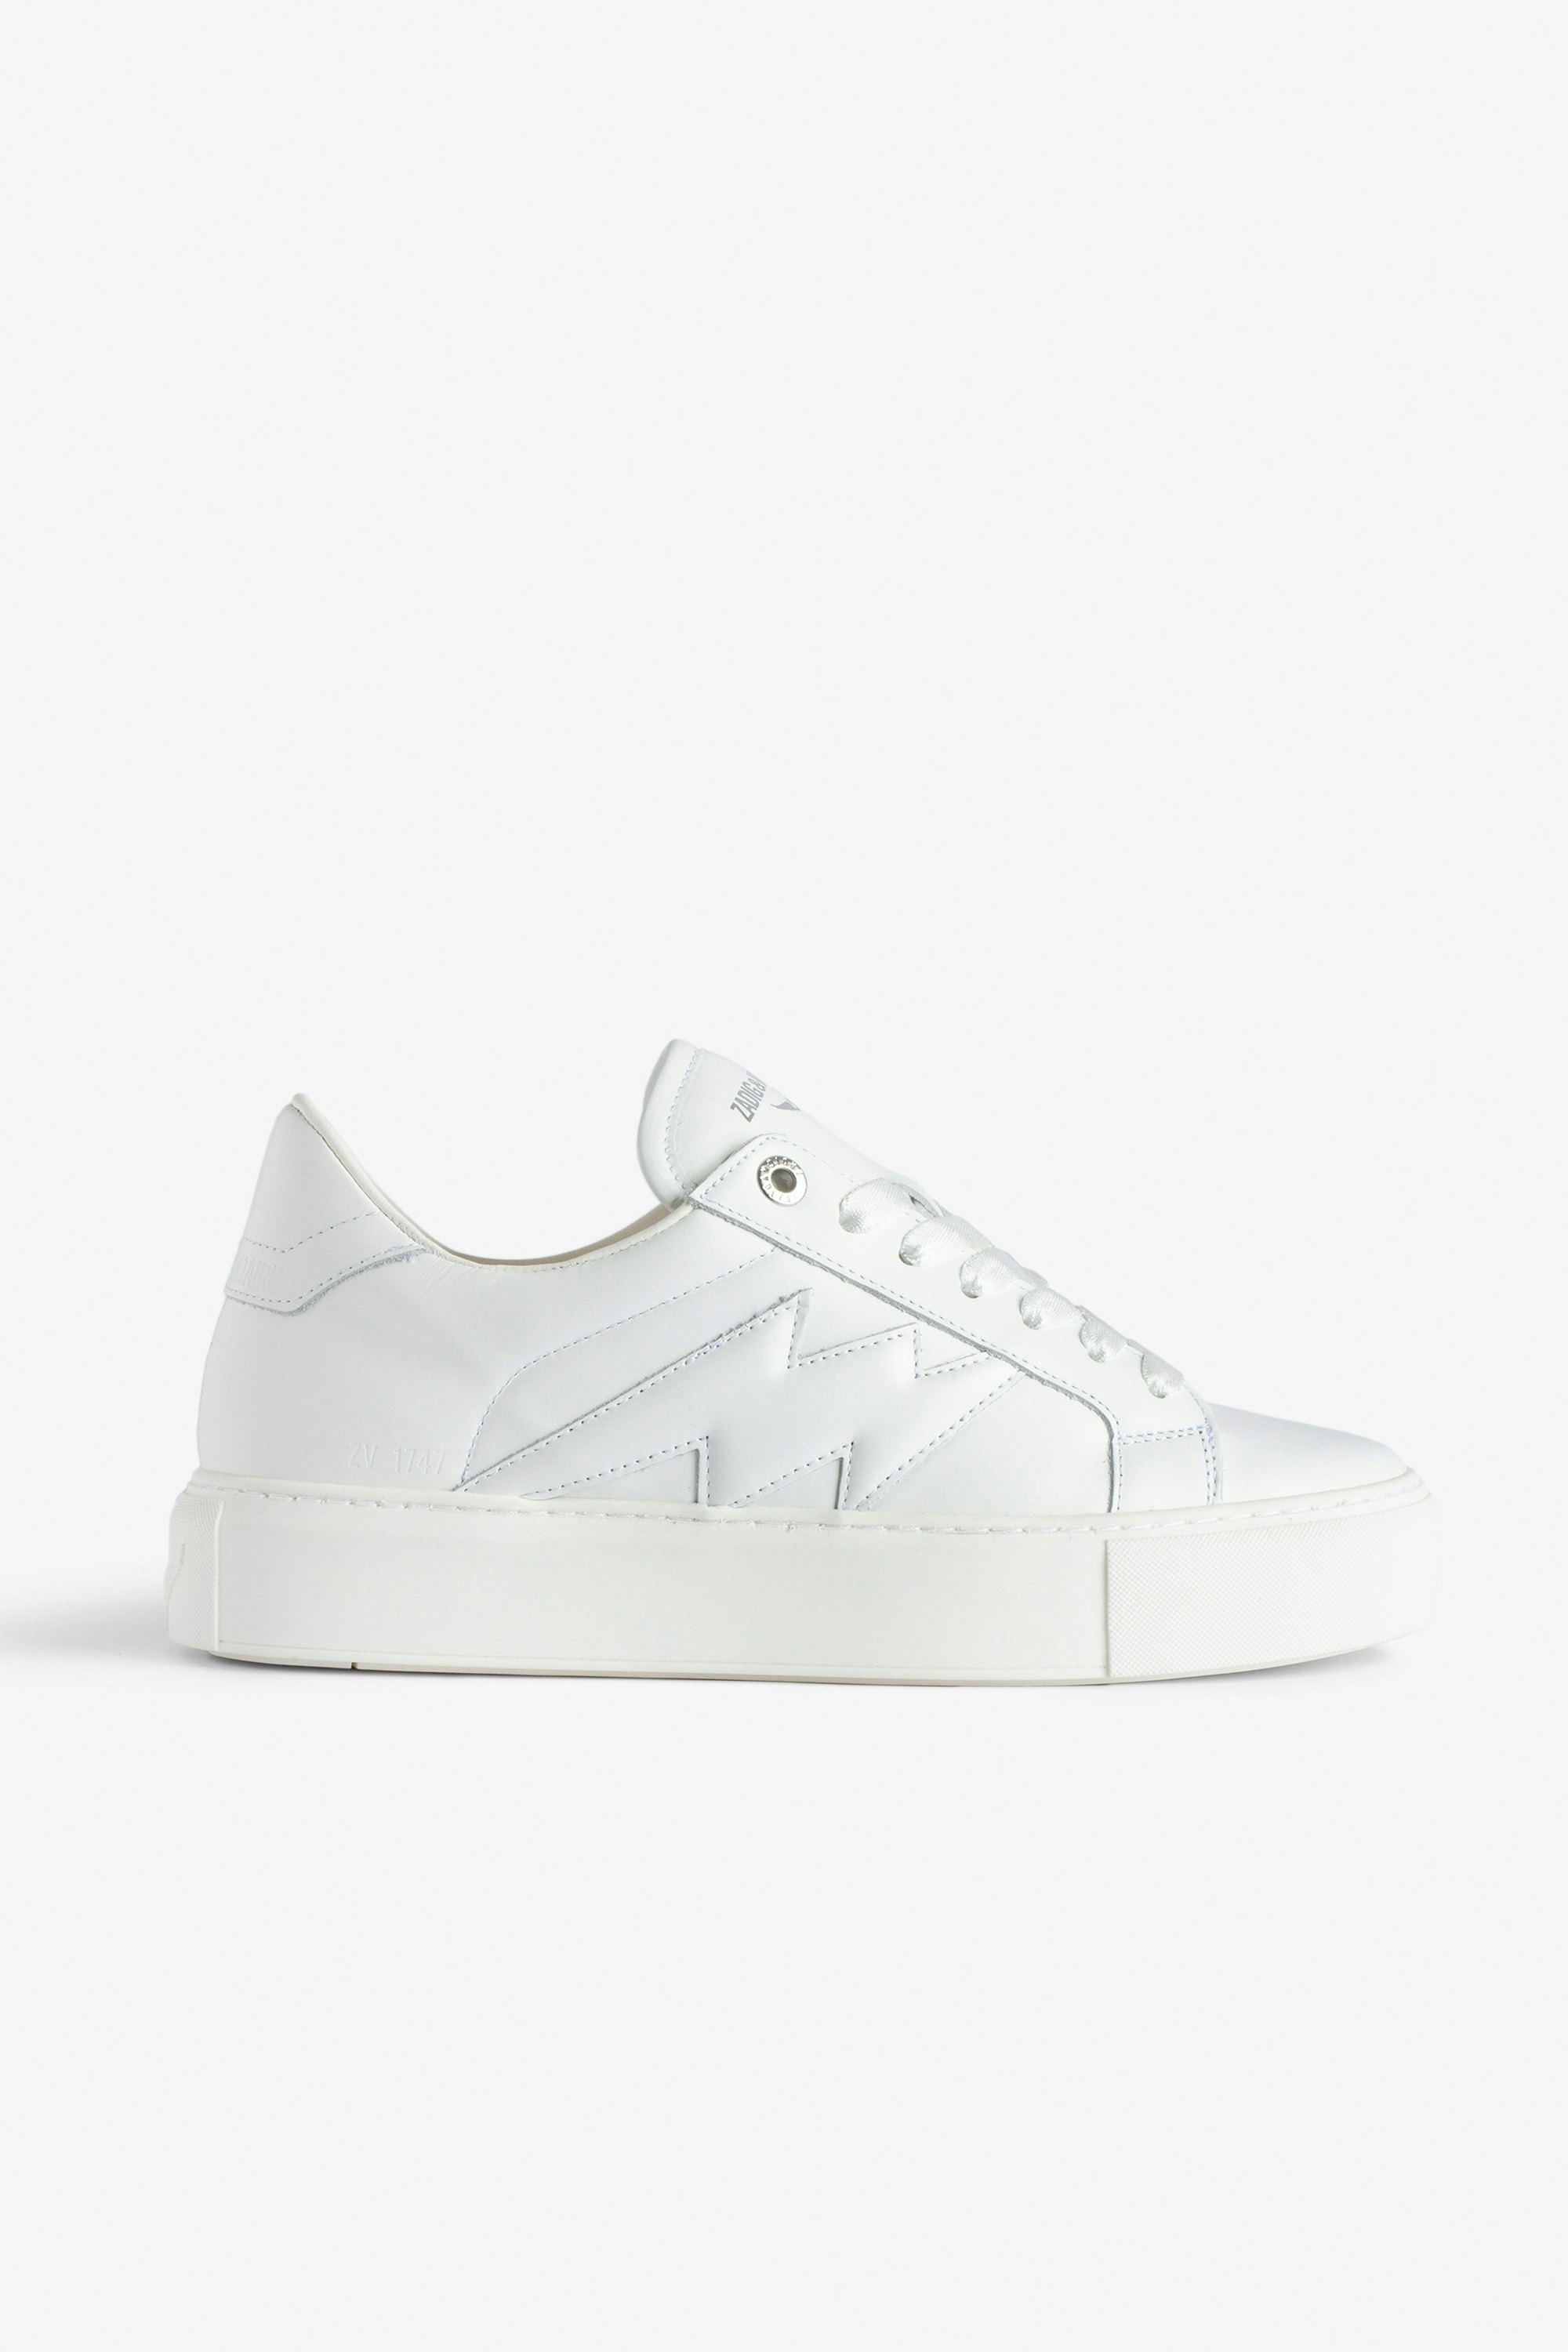 ZV1747 La Flash Low-Top Platform Sneakers - Women’s white smooth leather low-top sneakers with lightning bolt panels and chunky sole.